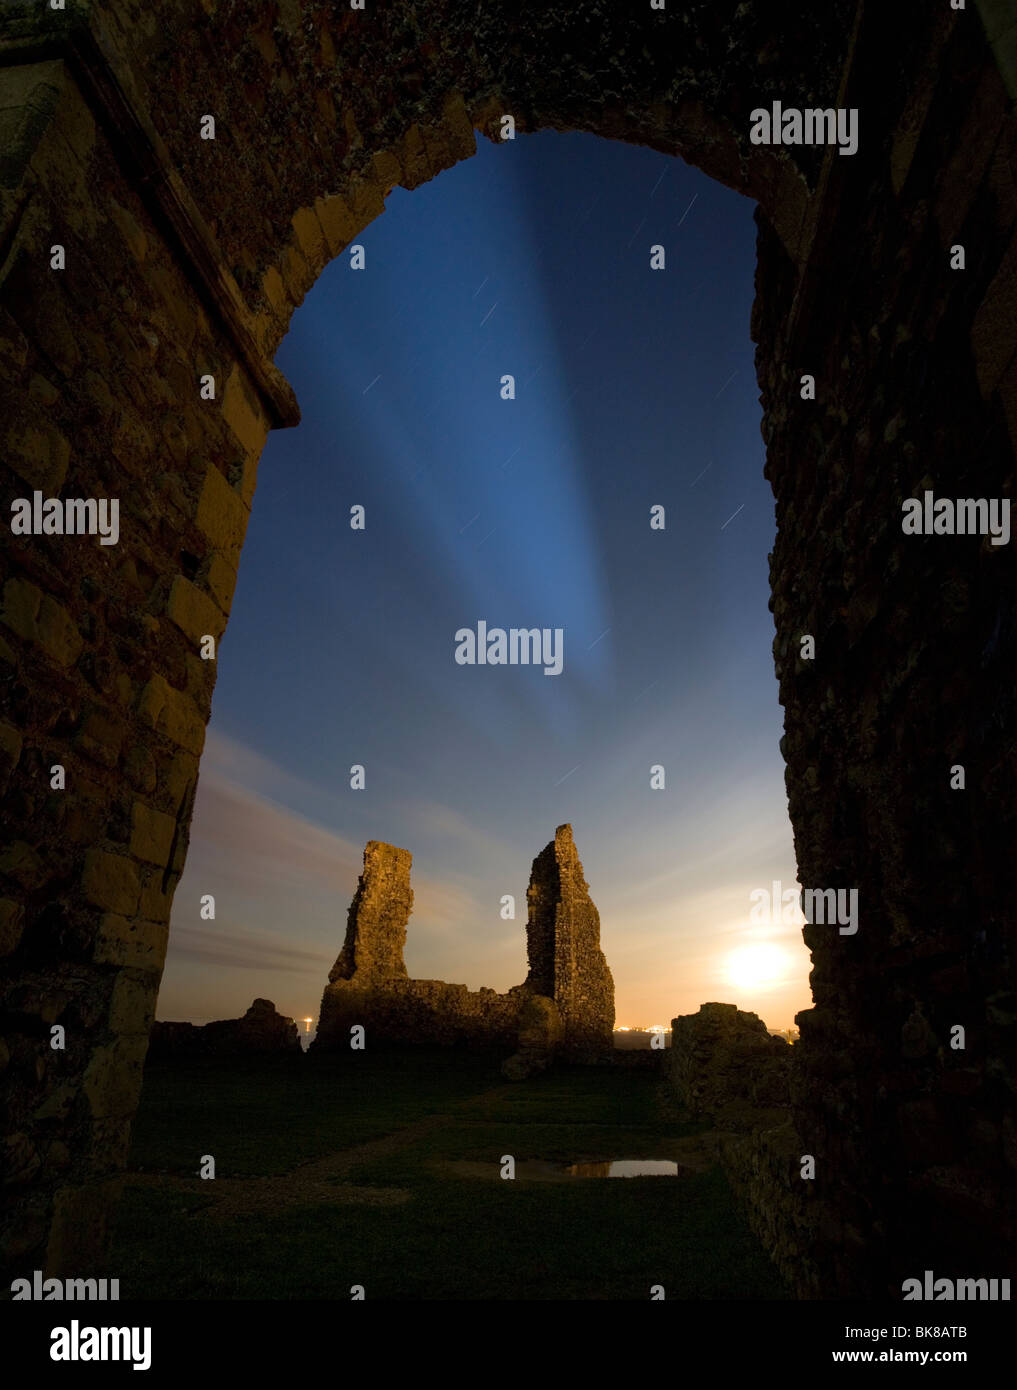 View from inside the Reculver towers with moonlight at night in Reculver, Kent, UK. Stock Photo